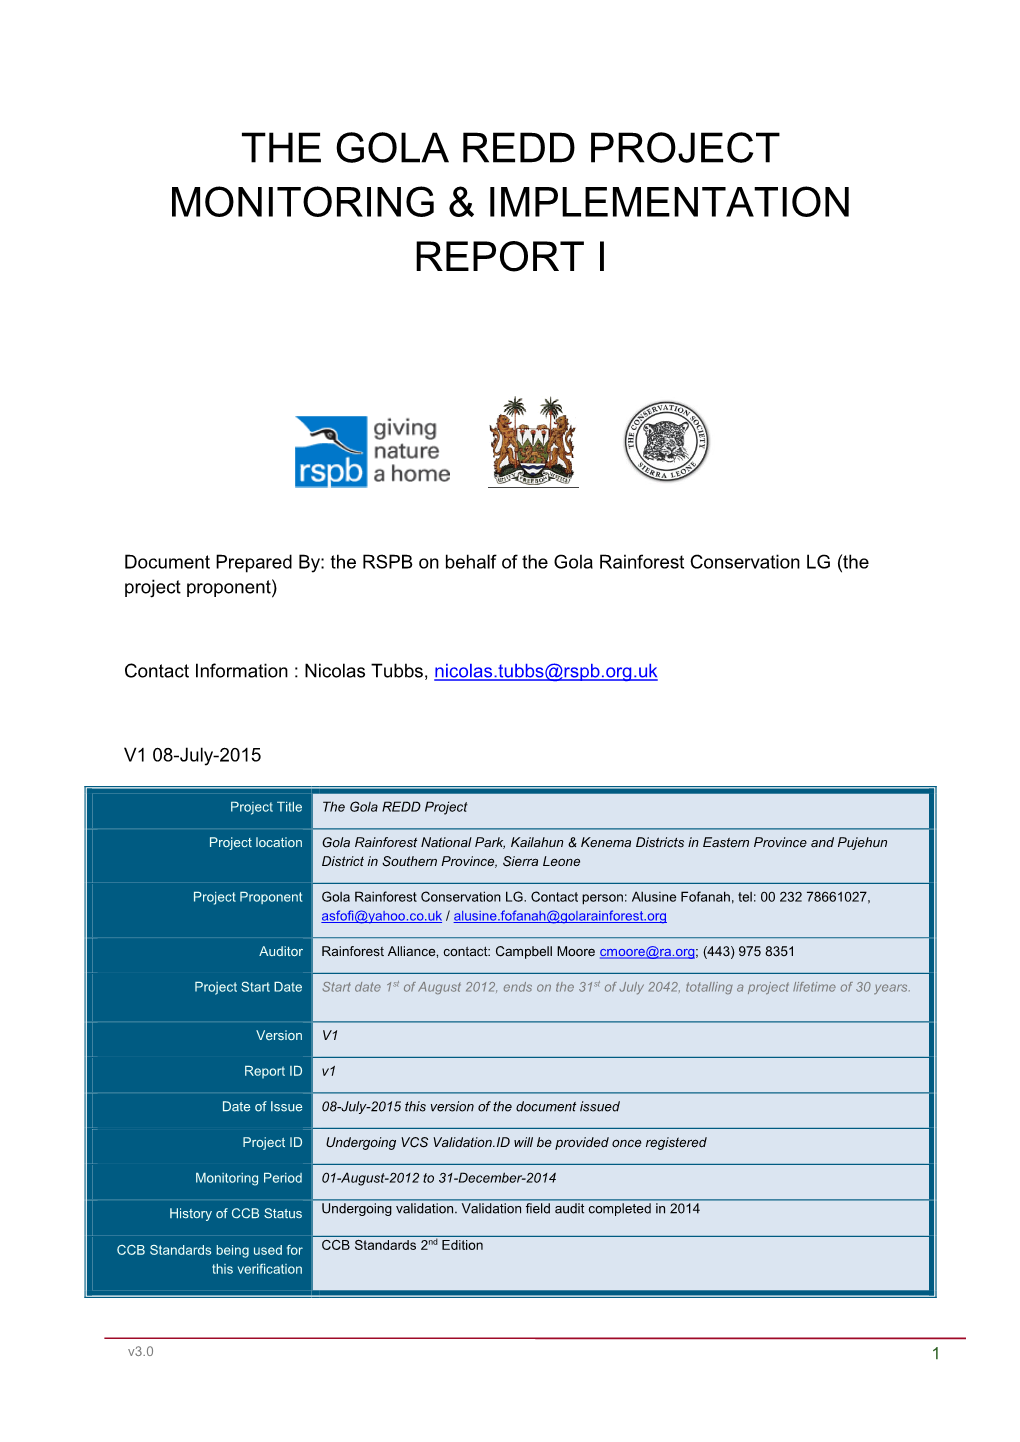 The Gola Redd Project Monitoring & Implementation Report I